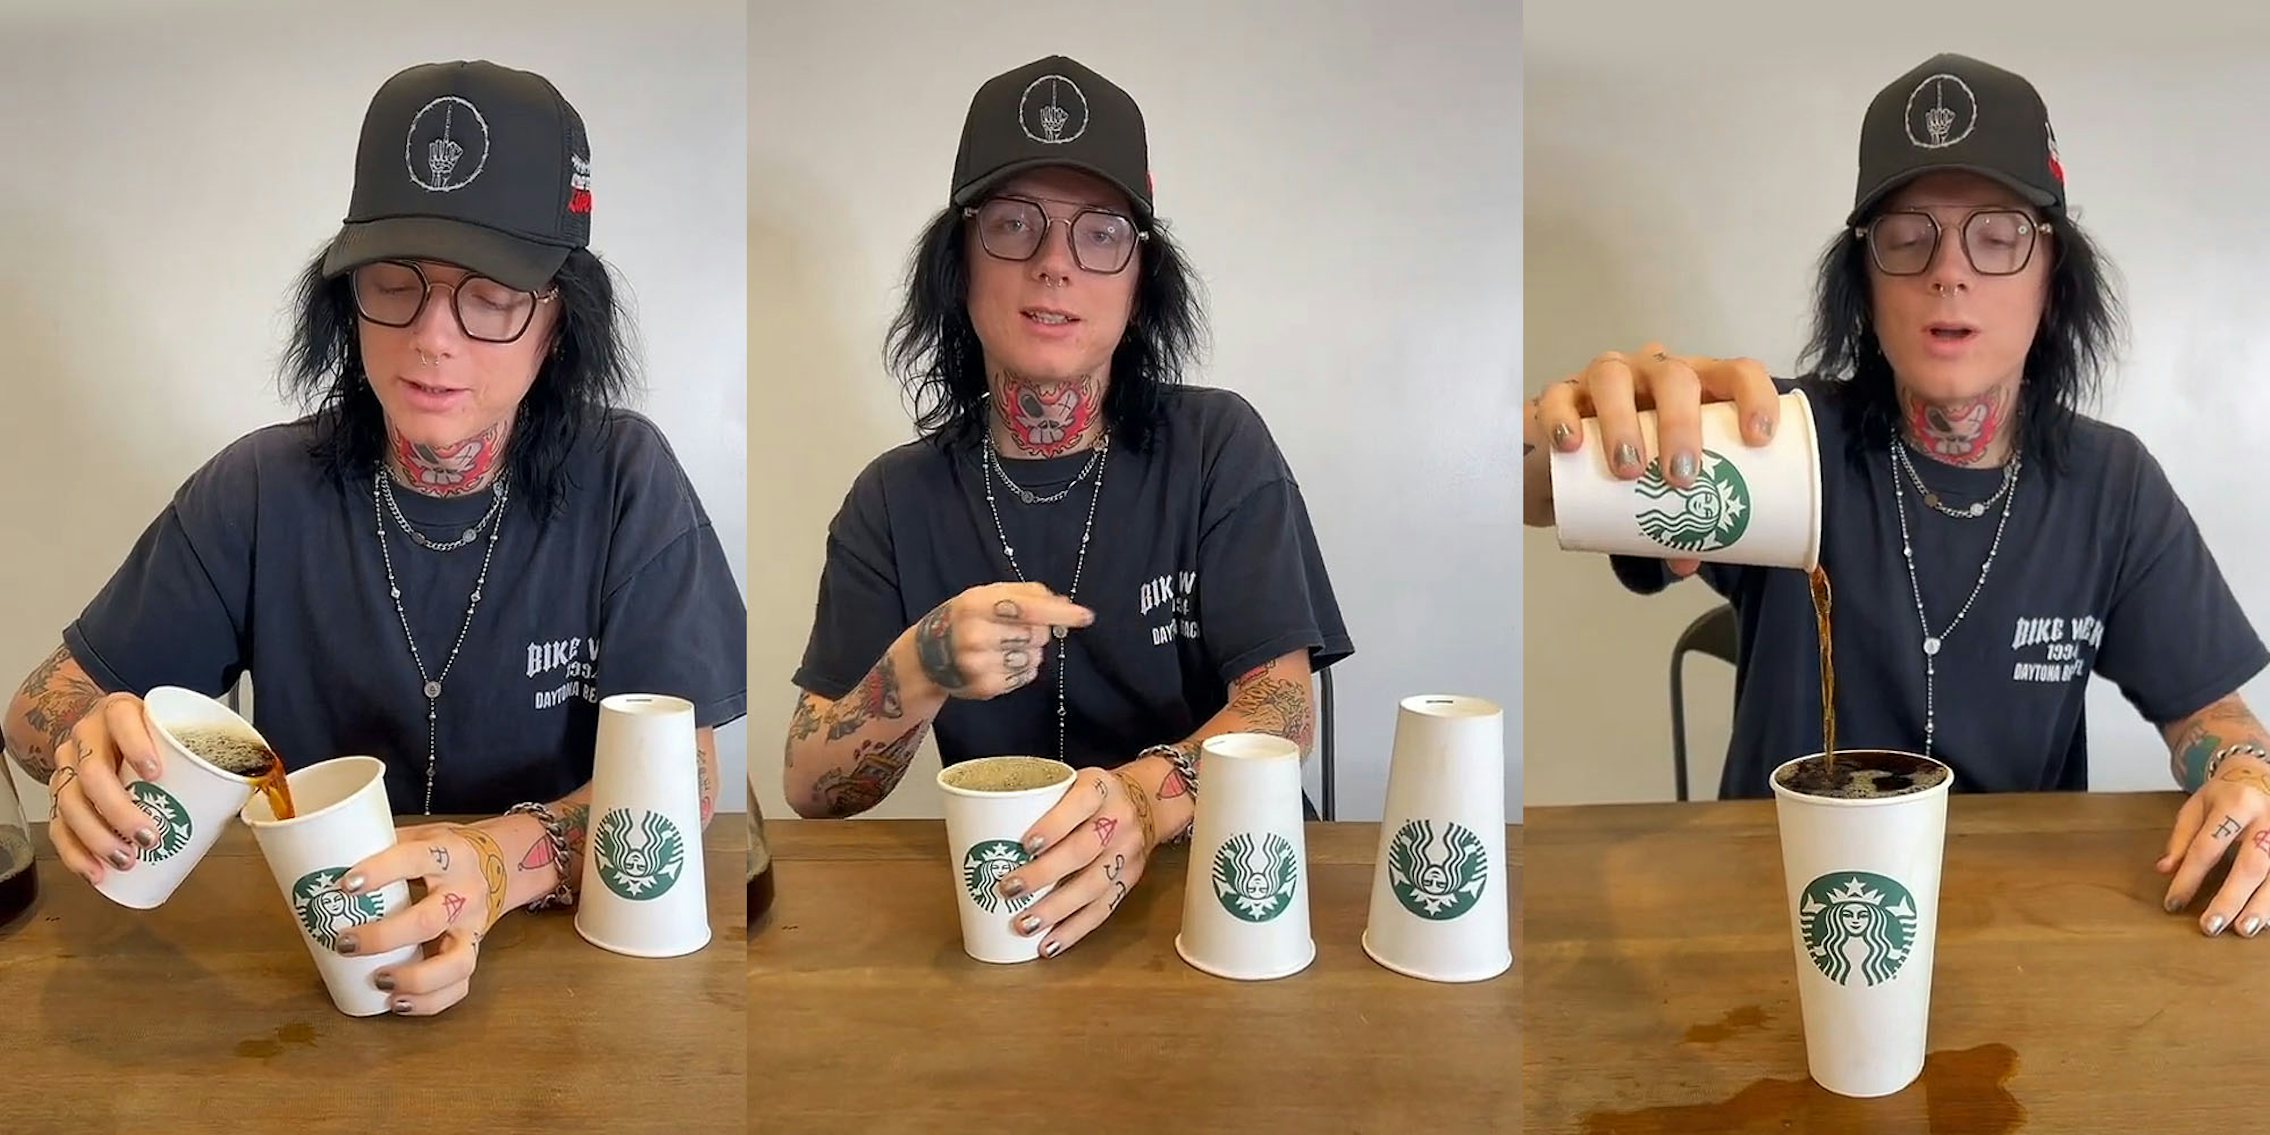 man at table with Starbucks cups all 3 sizes pouring the short cup into tall cup (l) Man holding Starbucks cup at table with coffee pointing hand right (c) man holding Starbucks cup at table pouring coffee into grande cup (r)